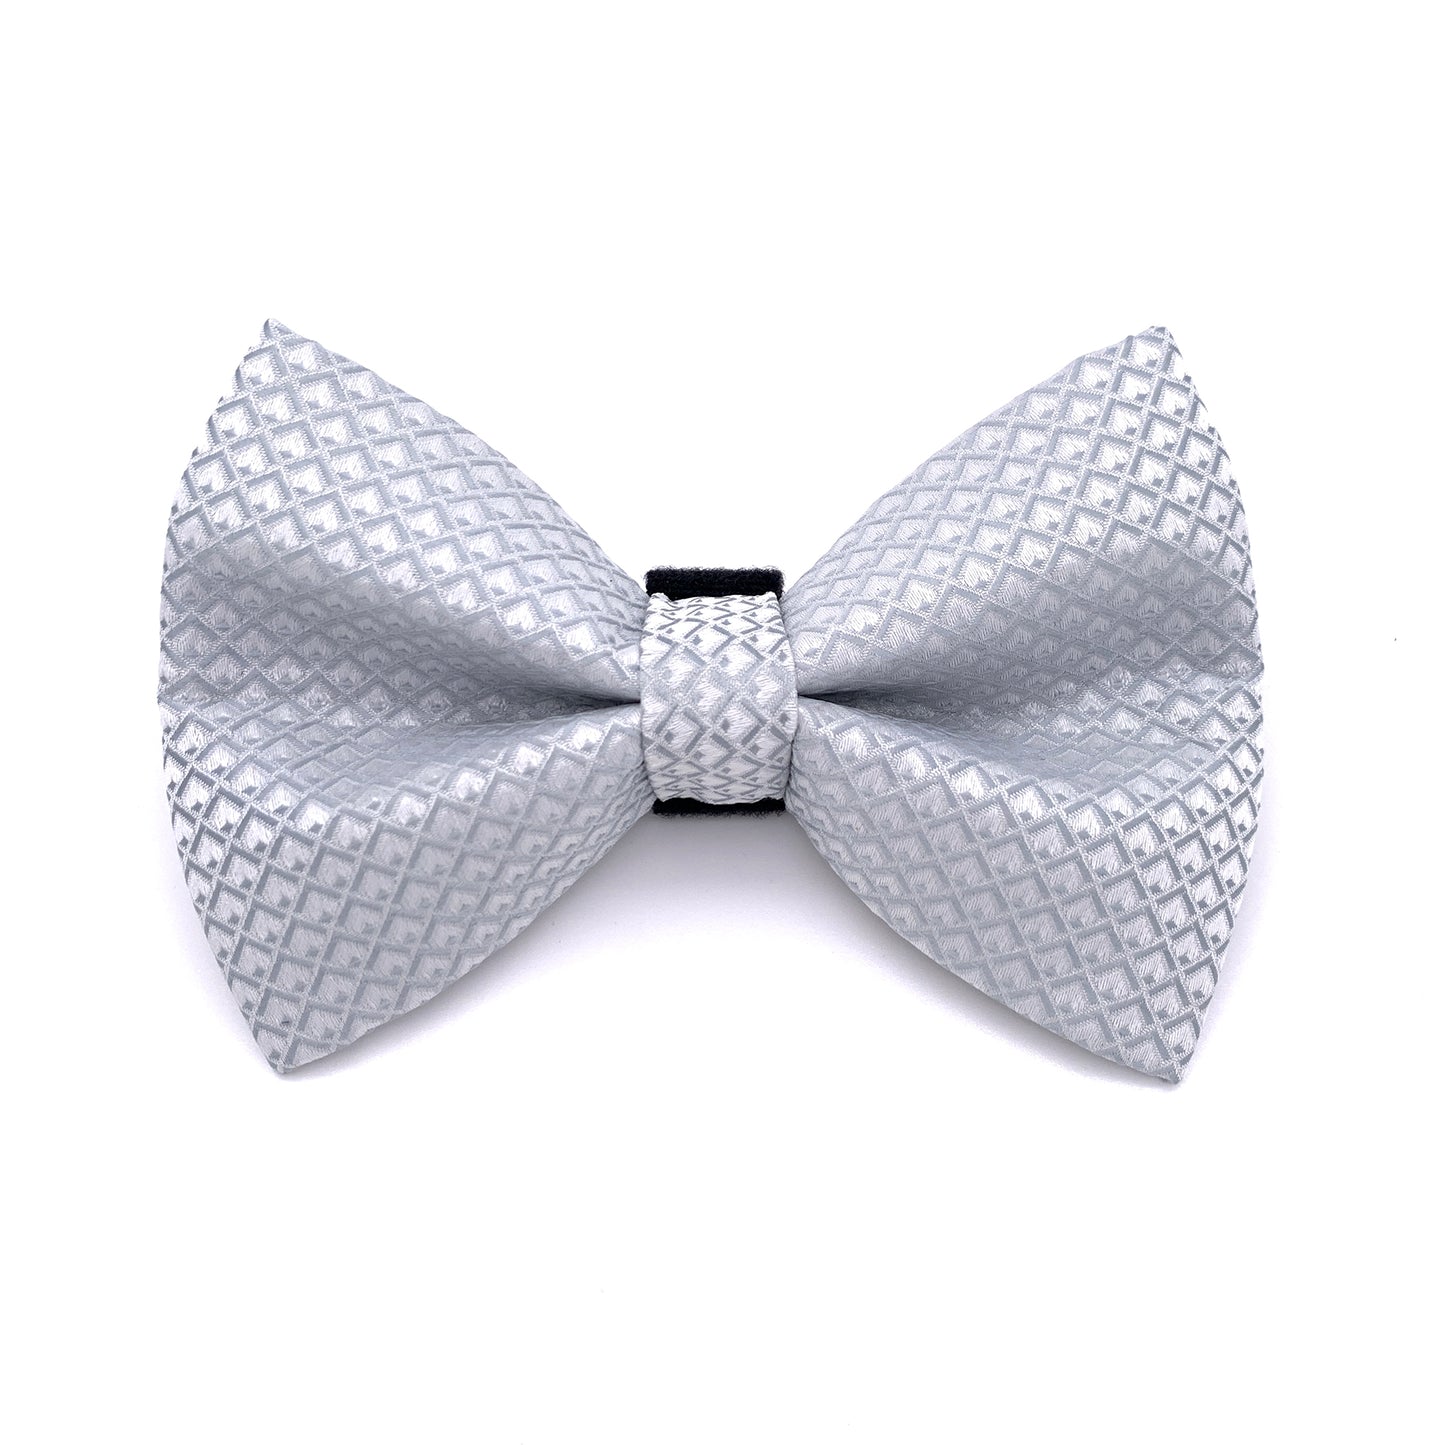 New Year's Eve Dog Bow Tie